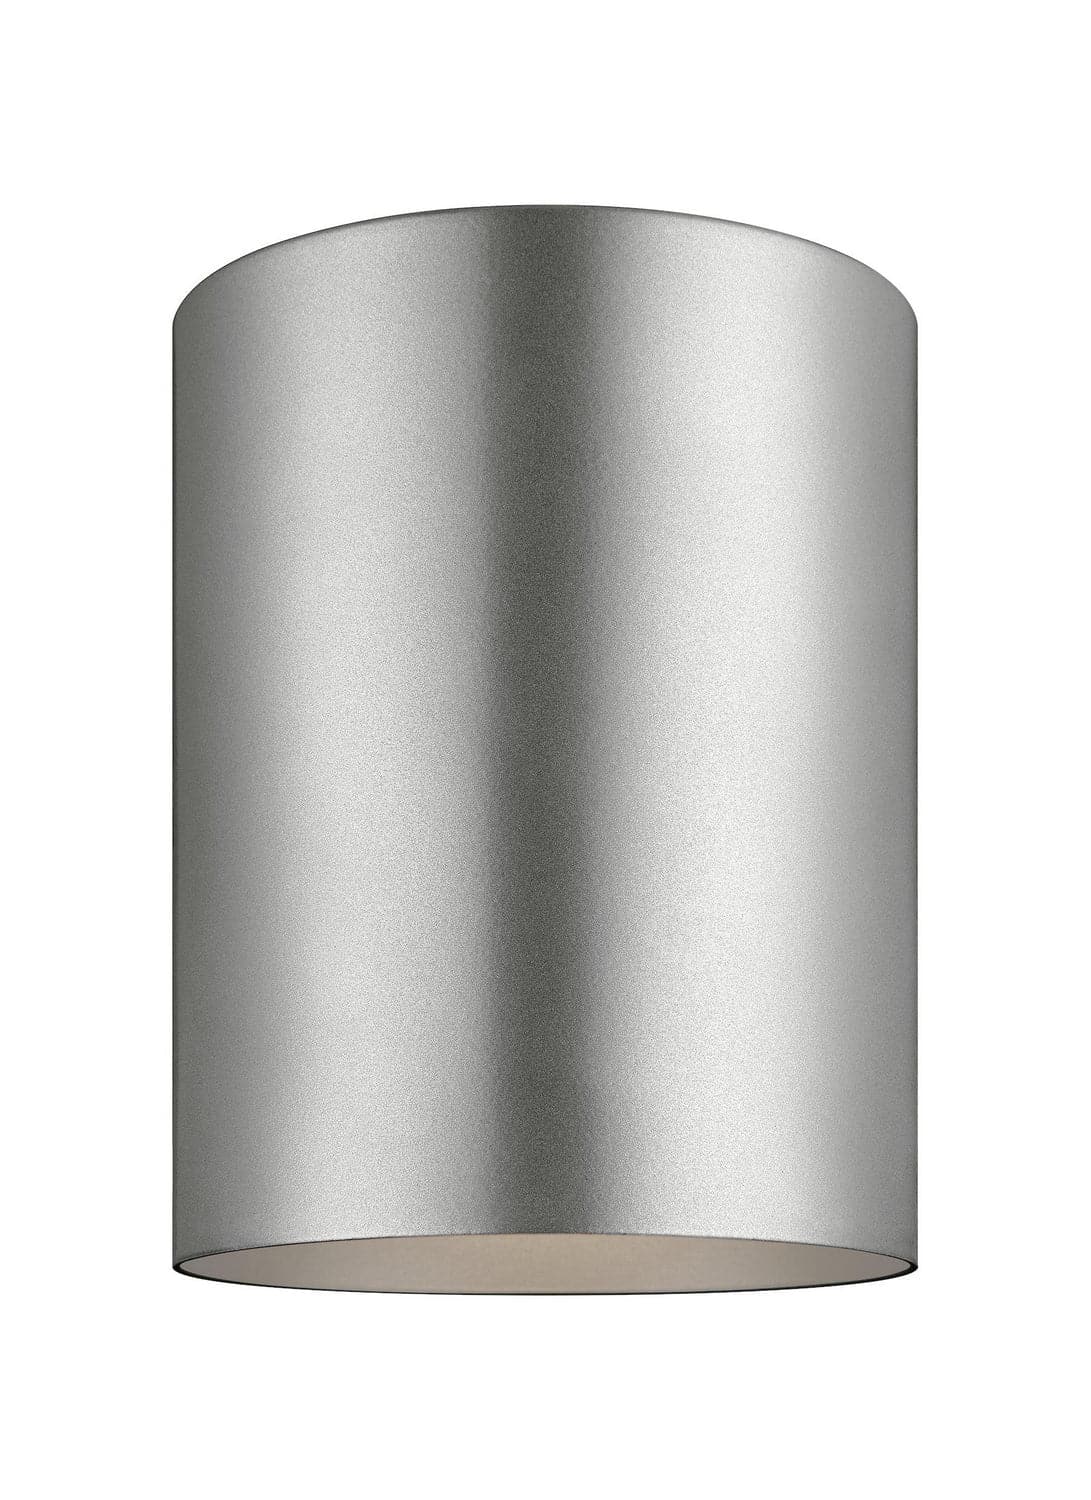 Visual Comfort Studio - 7813897S-753 - LED Flush Mount - Outdoor Cylinders - Painted Brushed Nickel